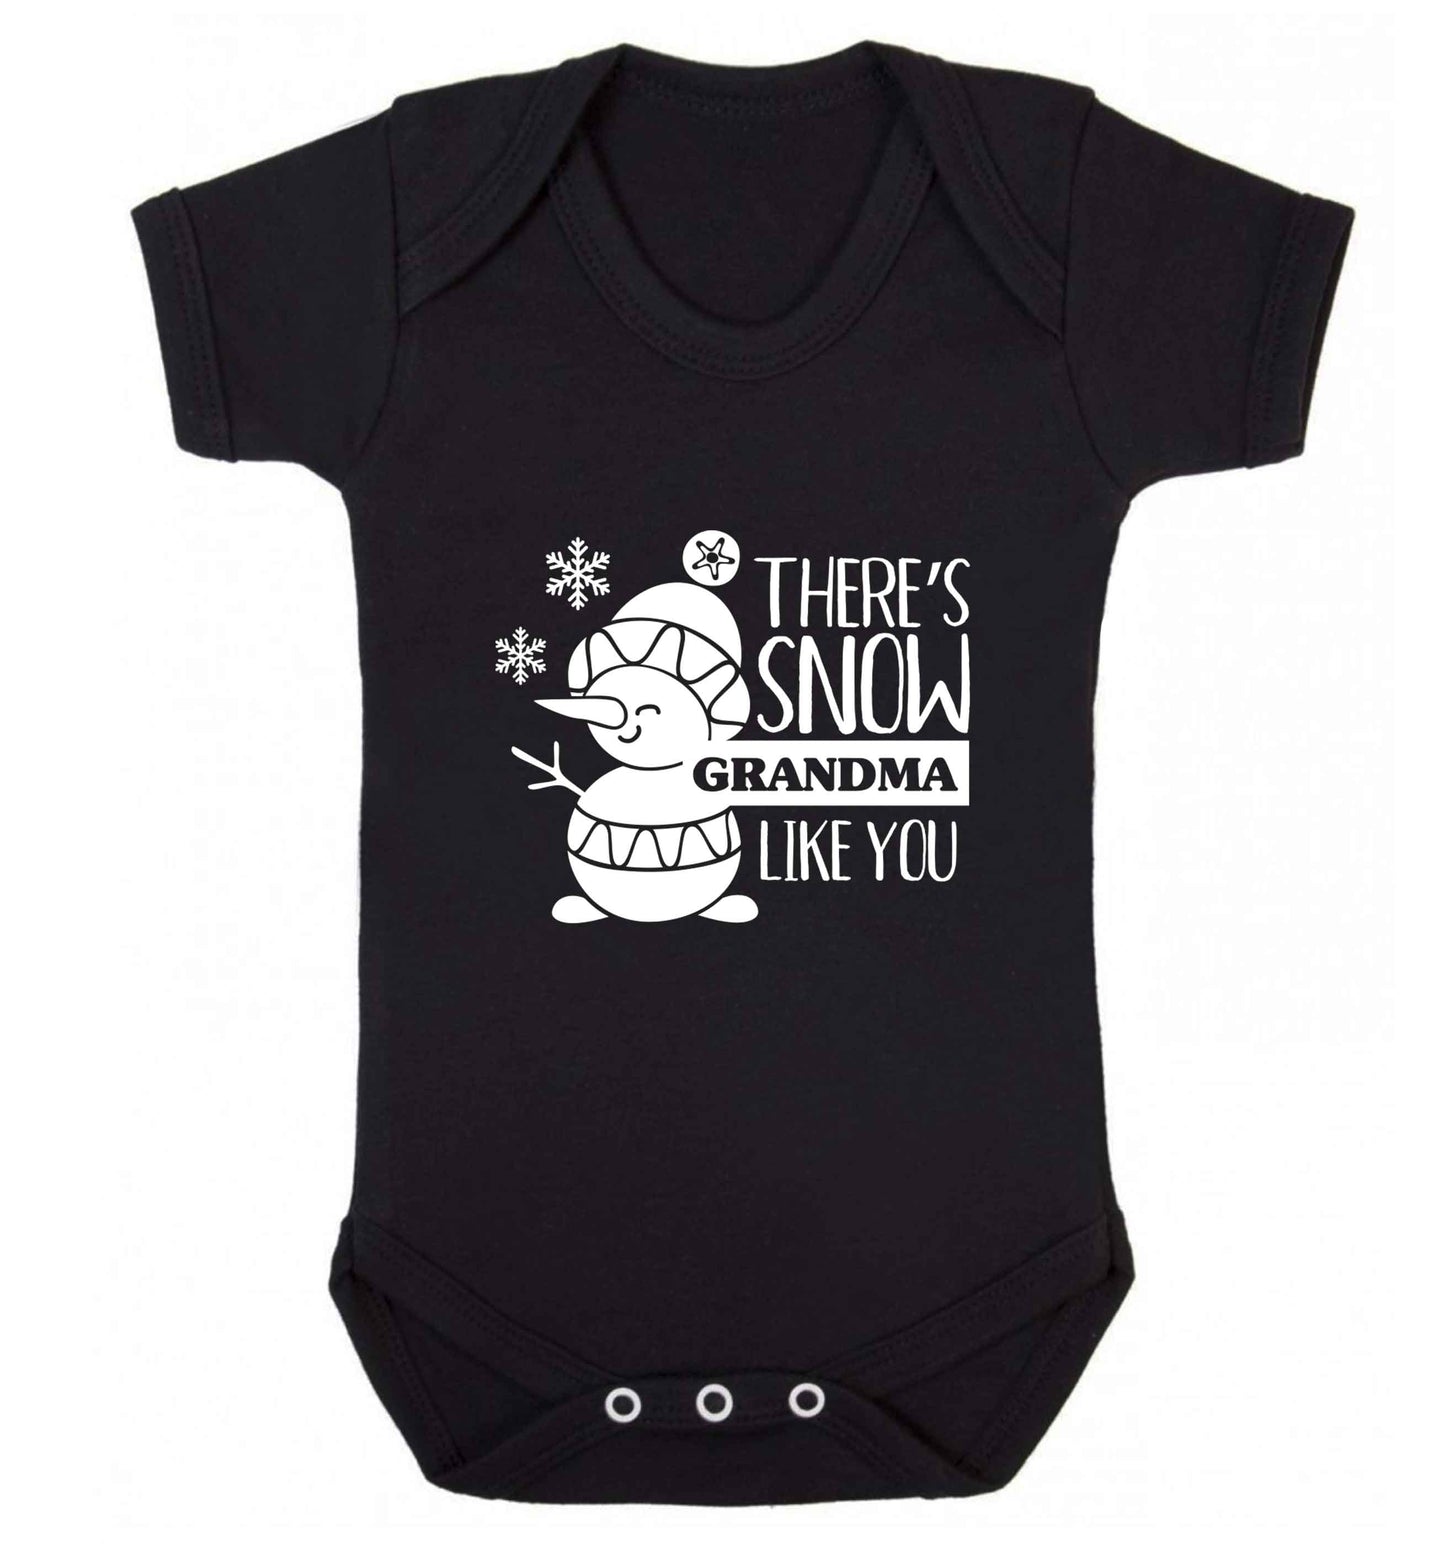 There's snow grandma like you baby vest black 18-24 months